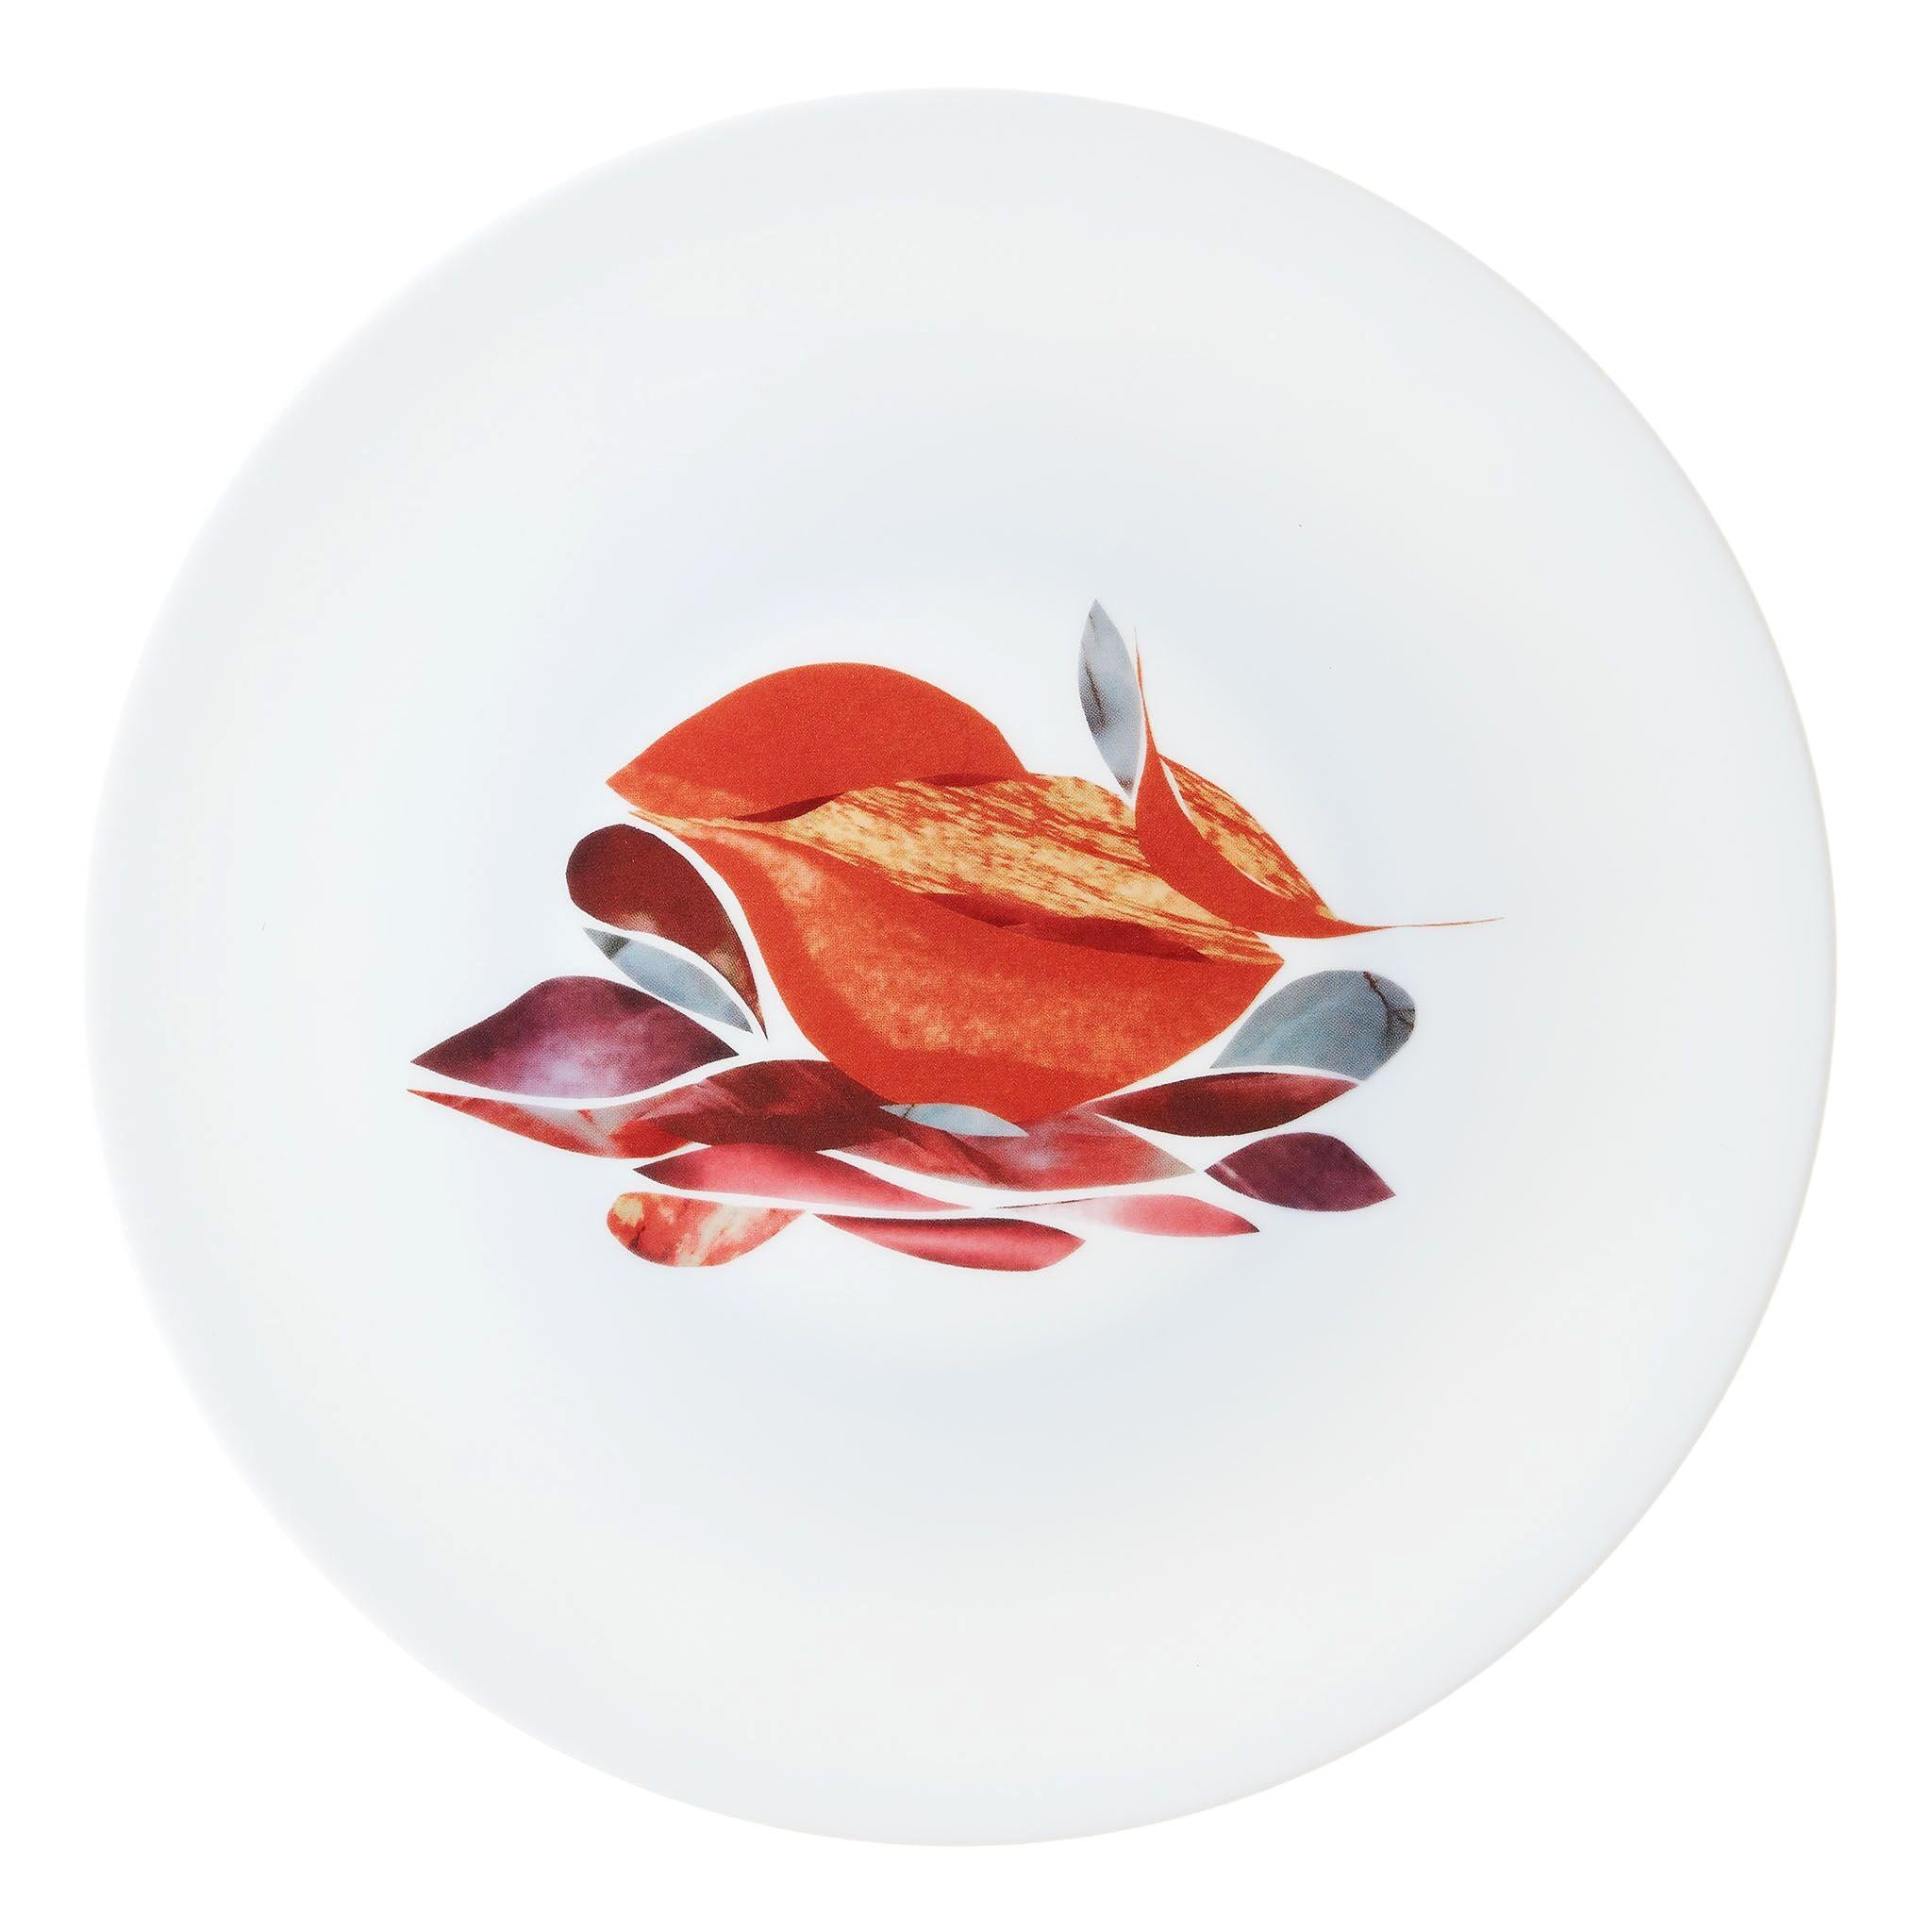 Dinner Porcelain Plate by the French Chef Alain Passard Model " Pumpkin"